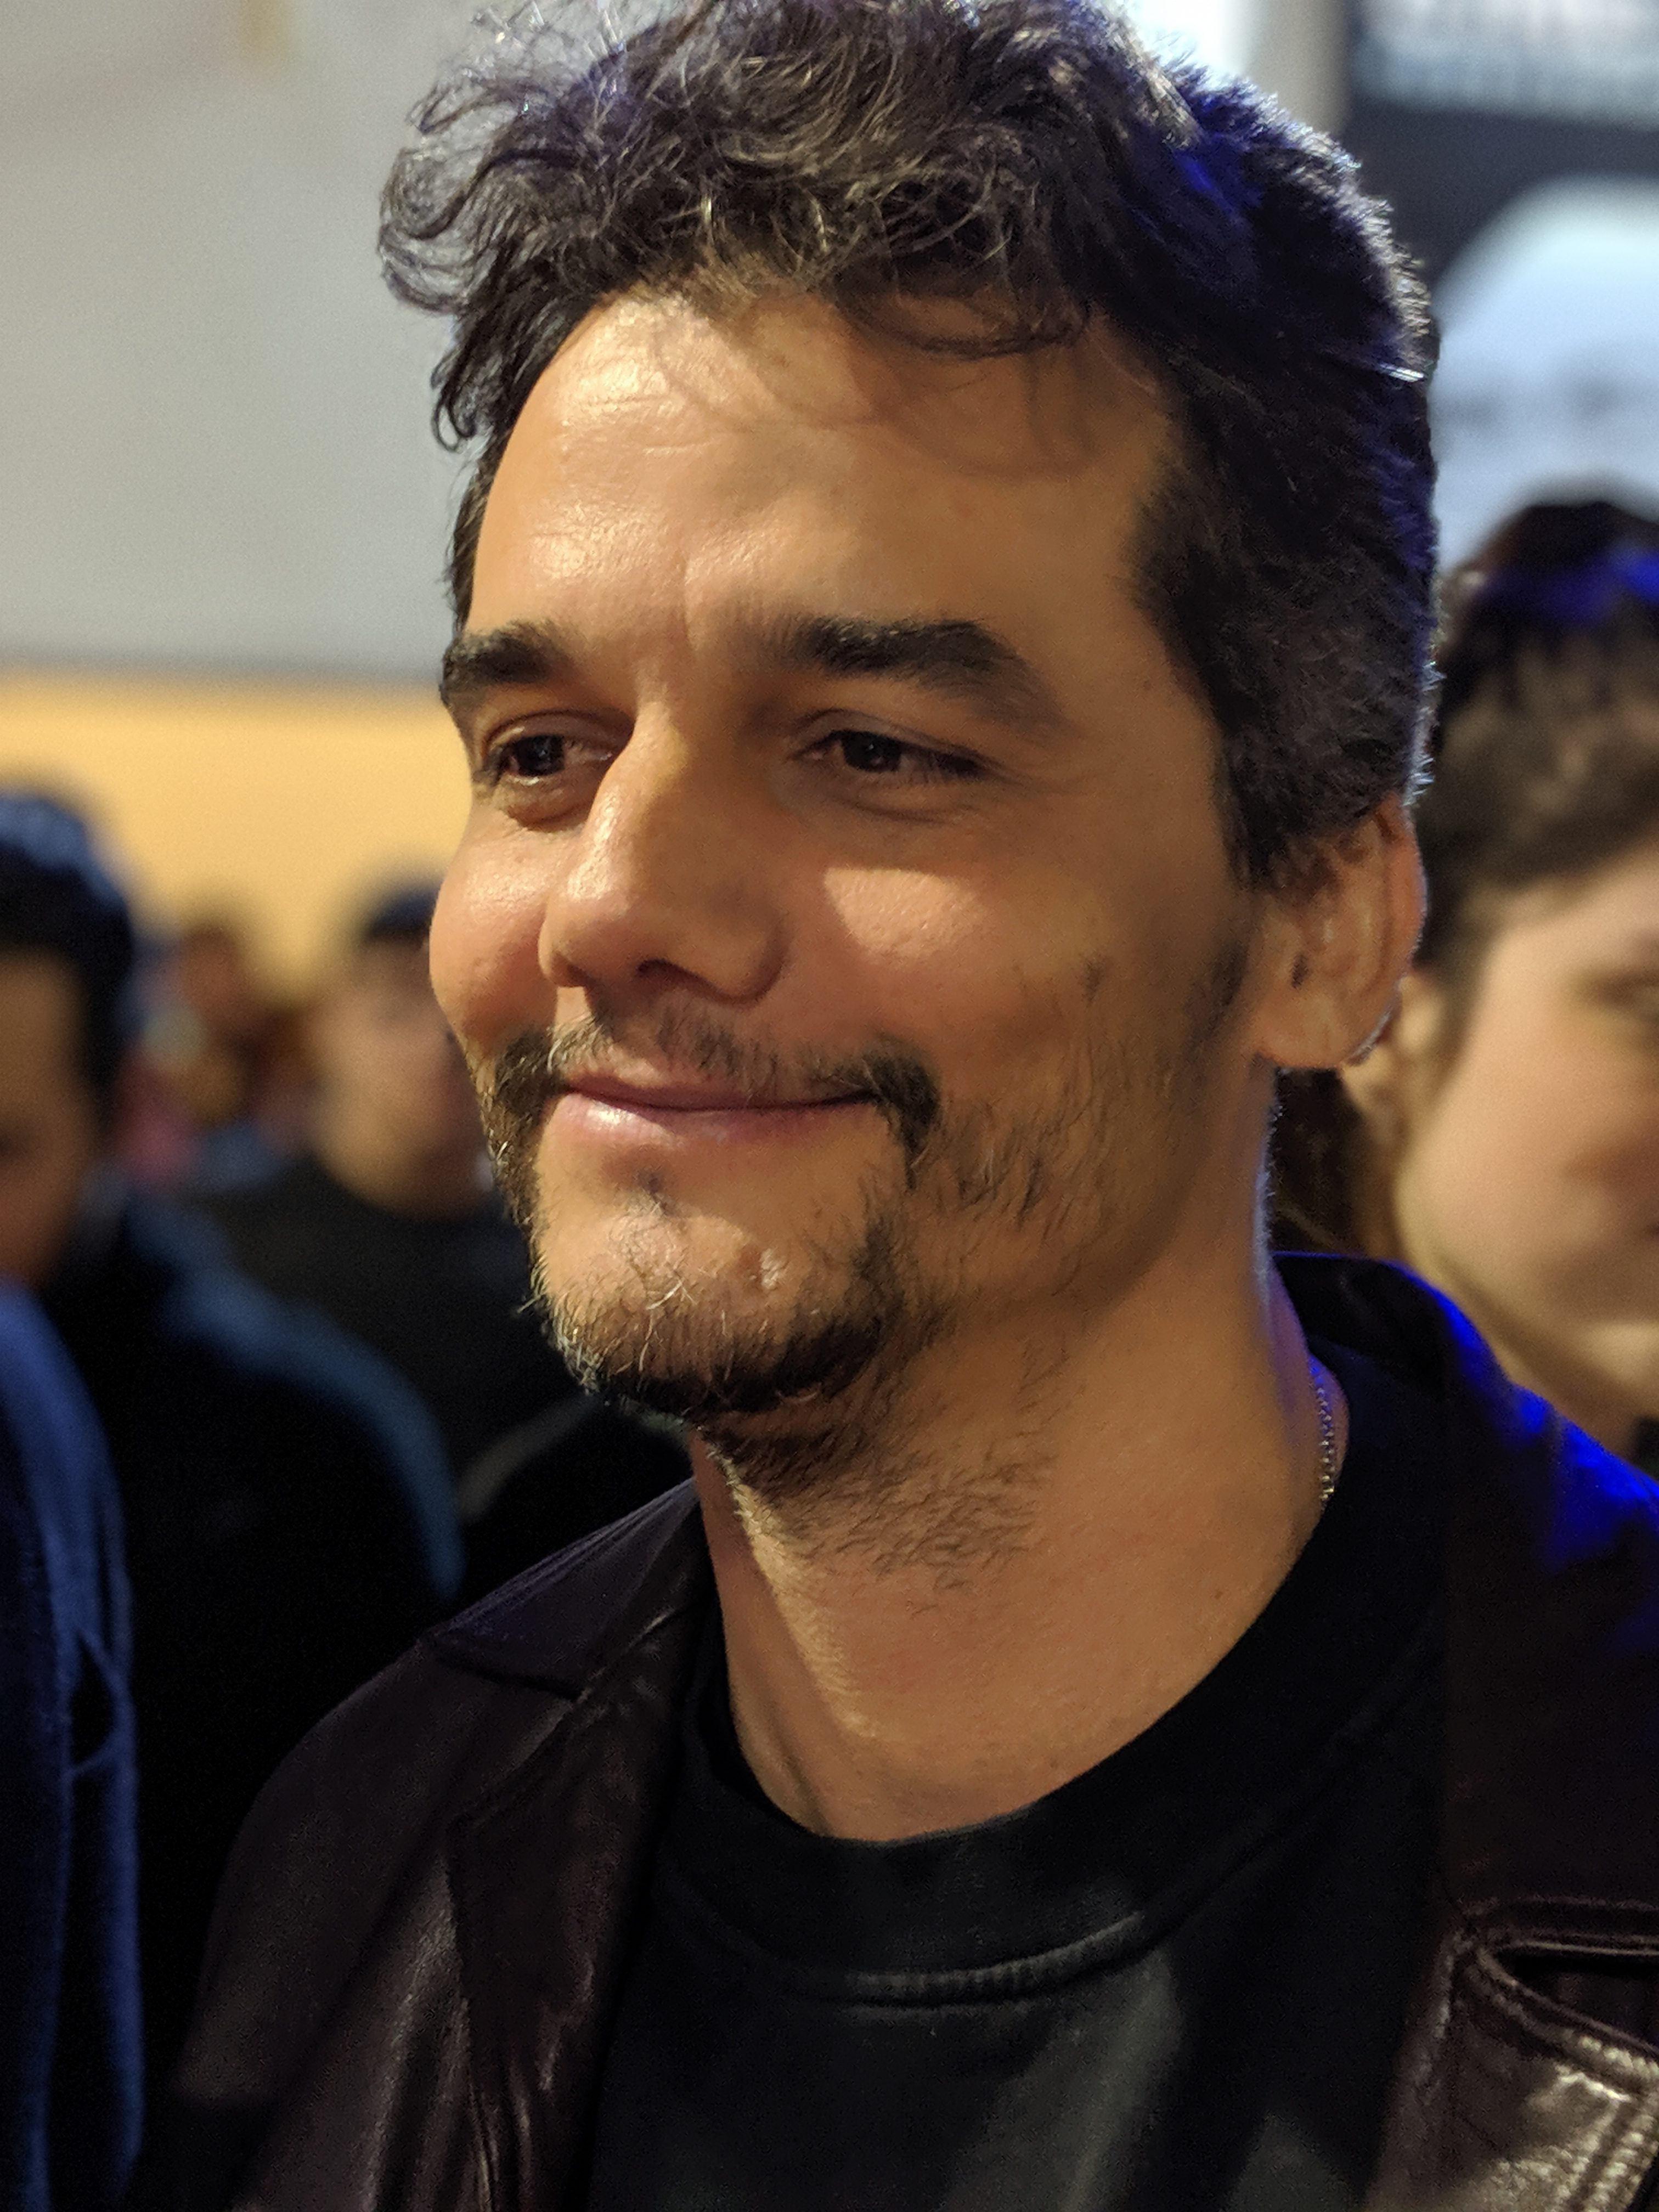 Goodwill Ambassador: Brazilian actor Wagner Moura joins campaign